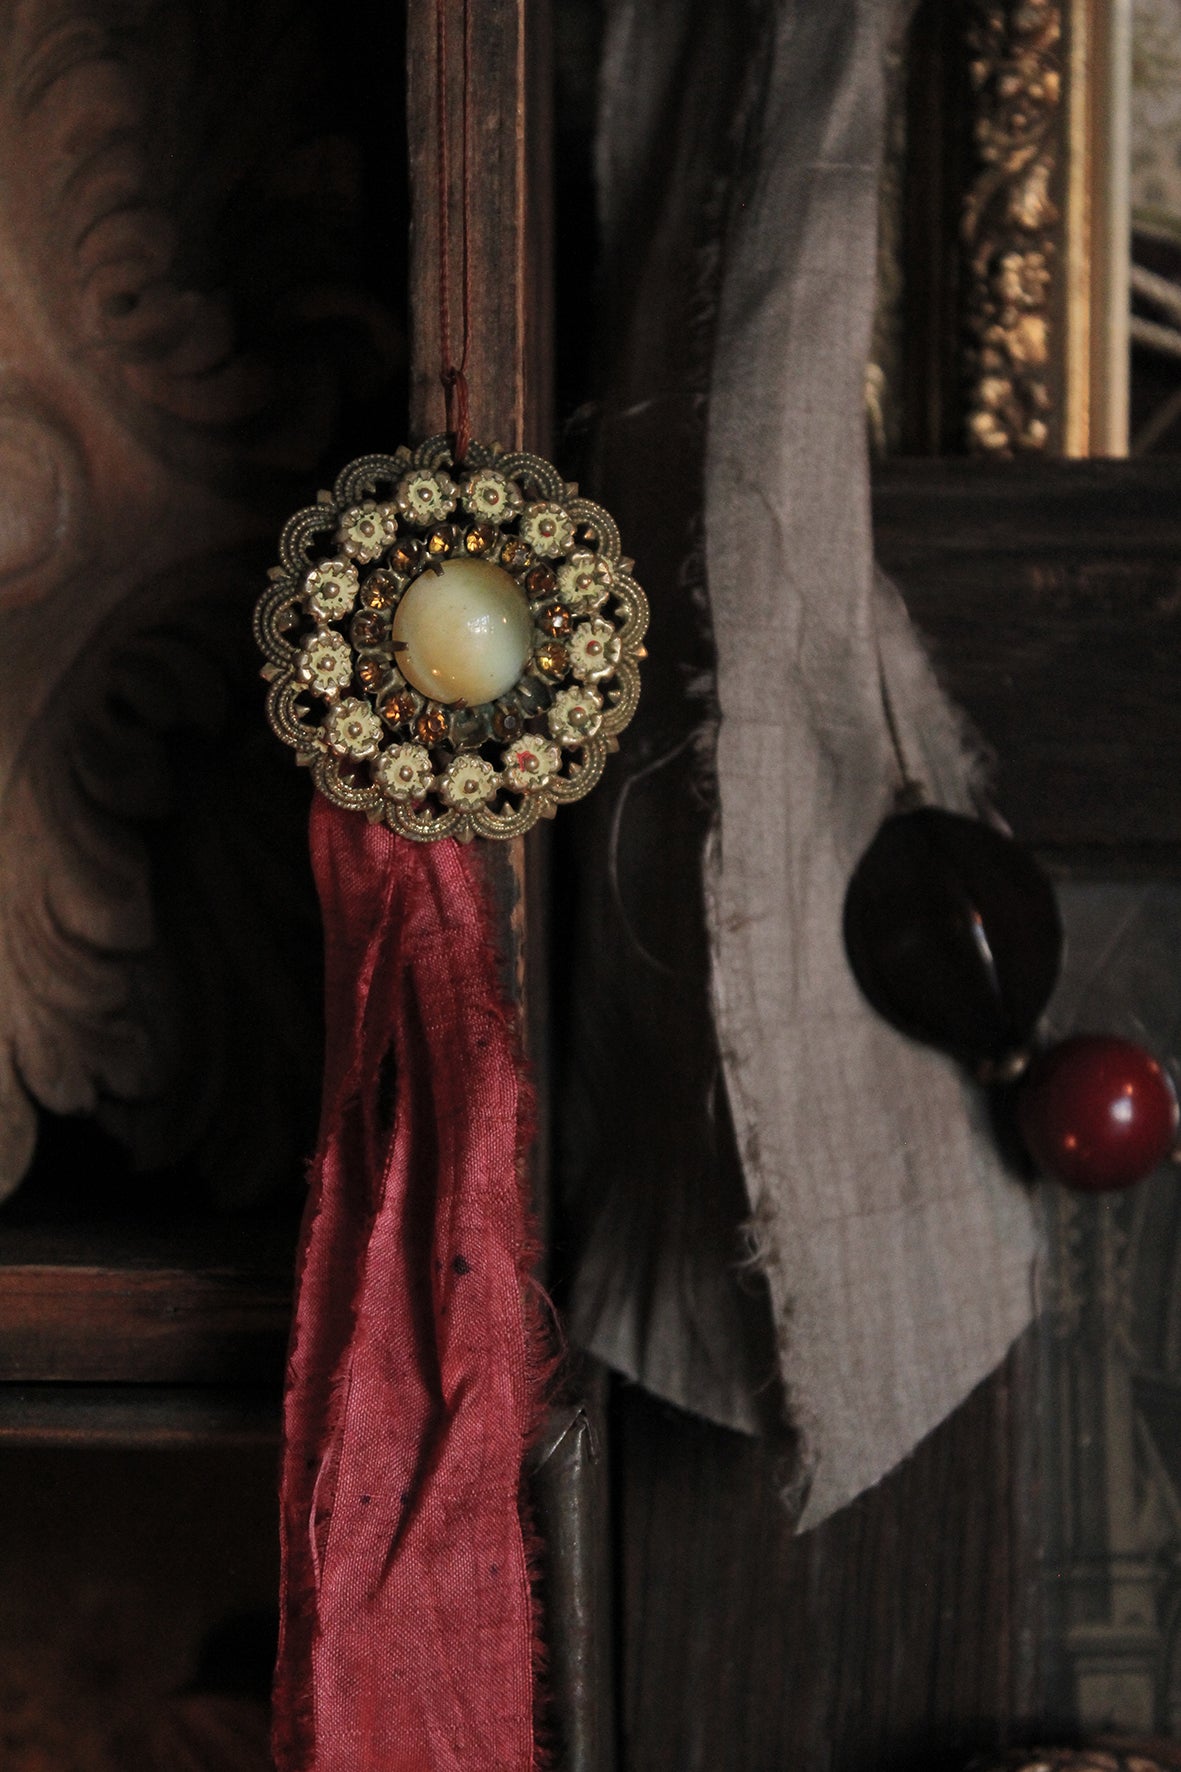 Armoire Brooch Decoration - The Resting Hour - 3